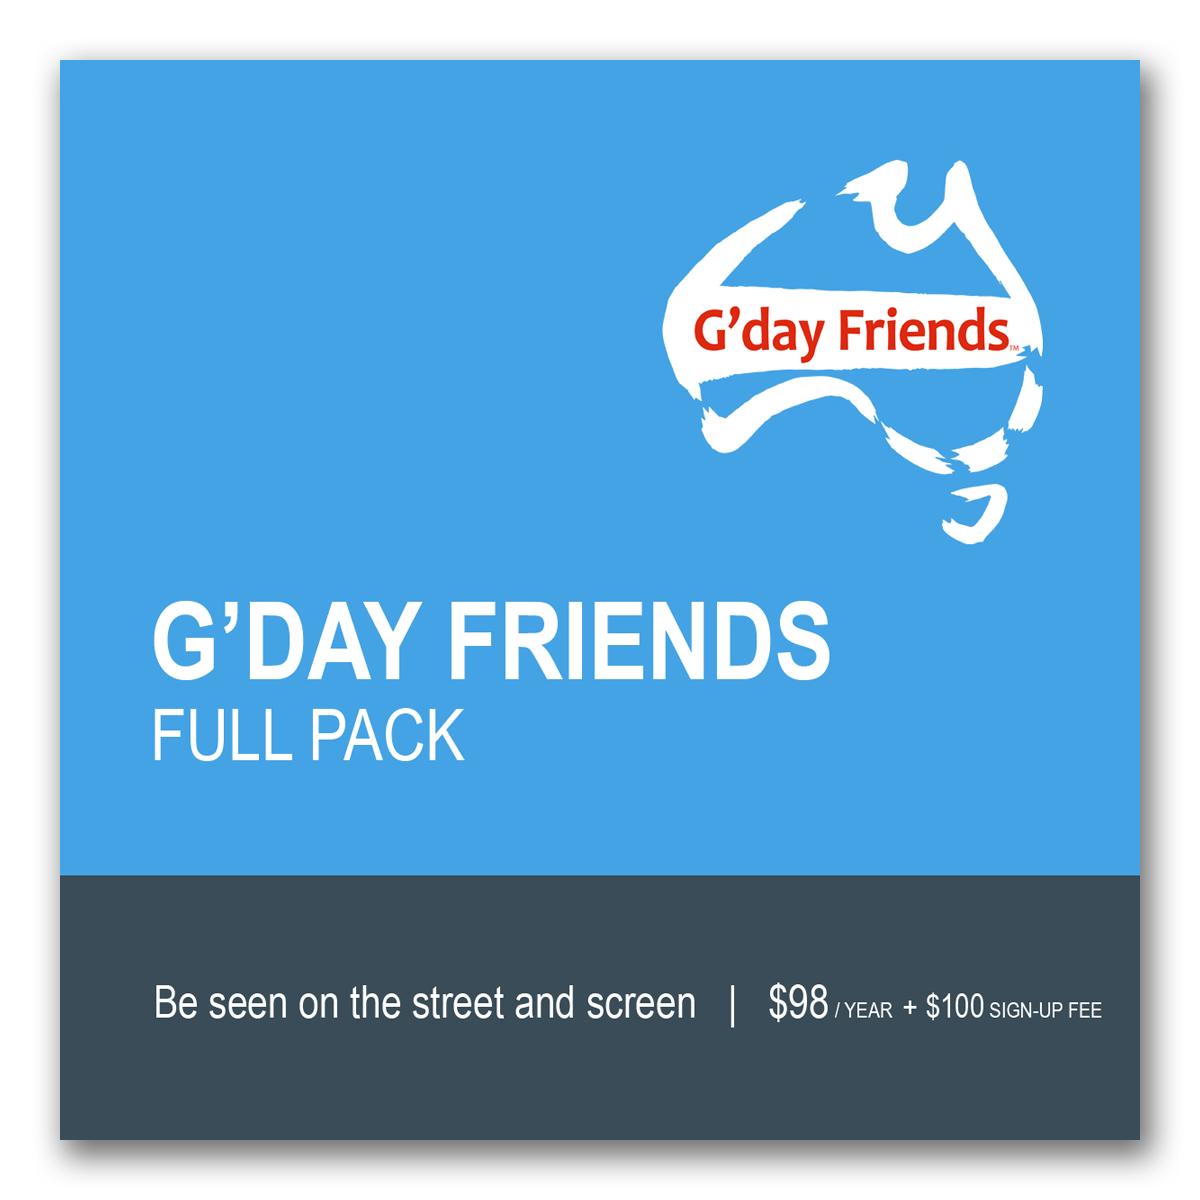 G'day Friends Full Pack icon